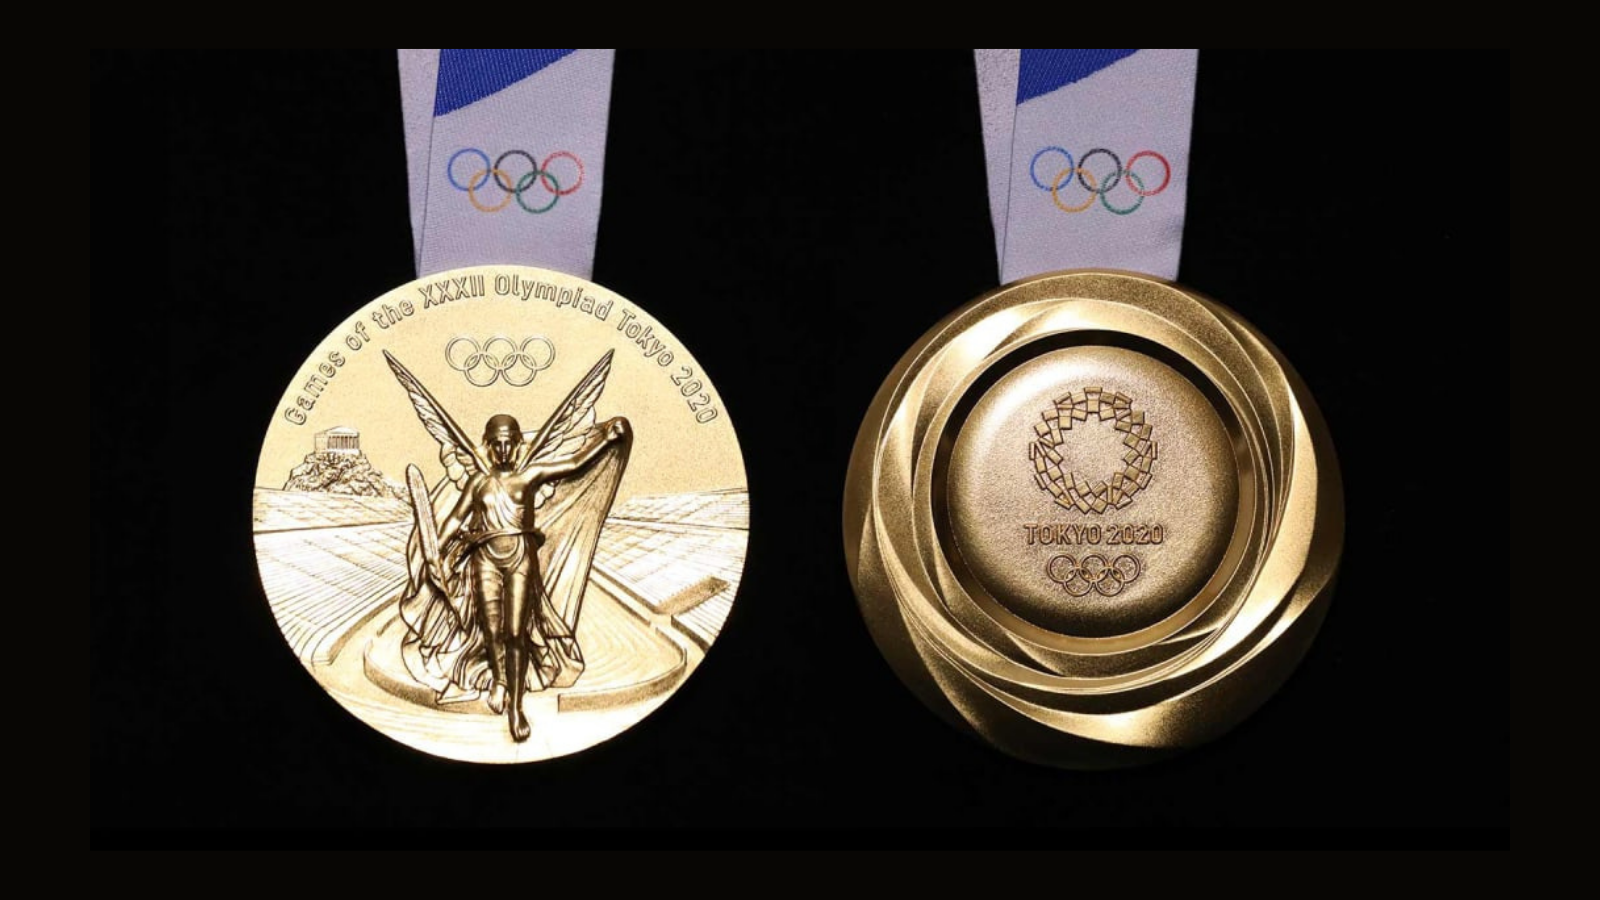 olympic gold medal png